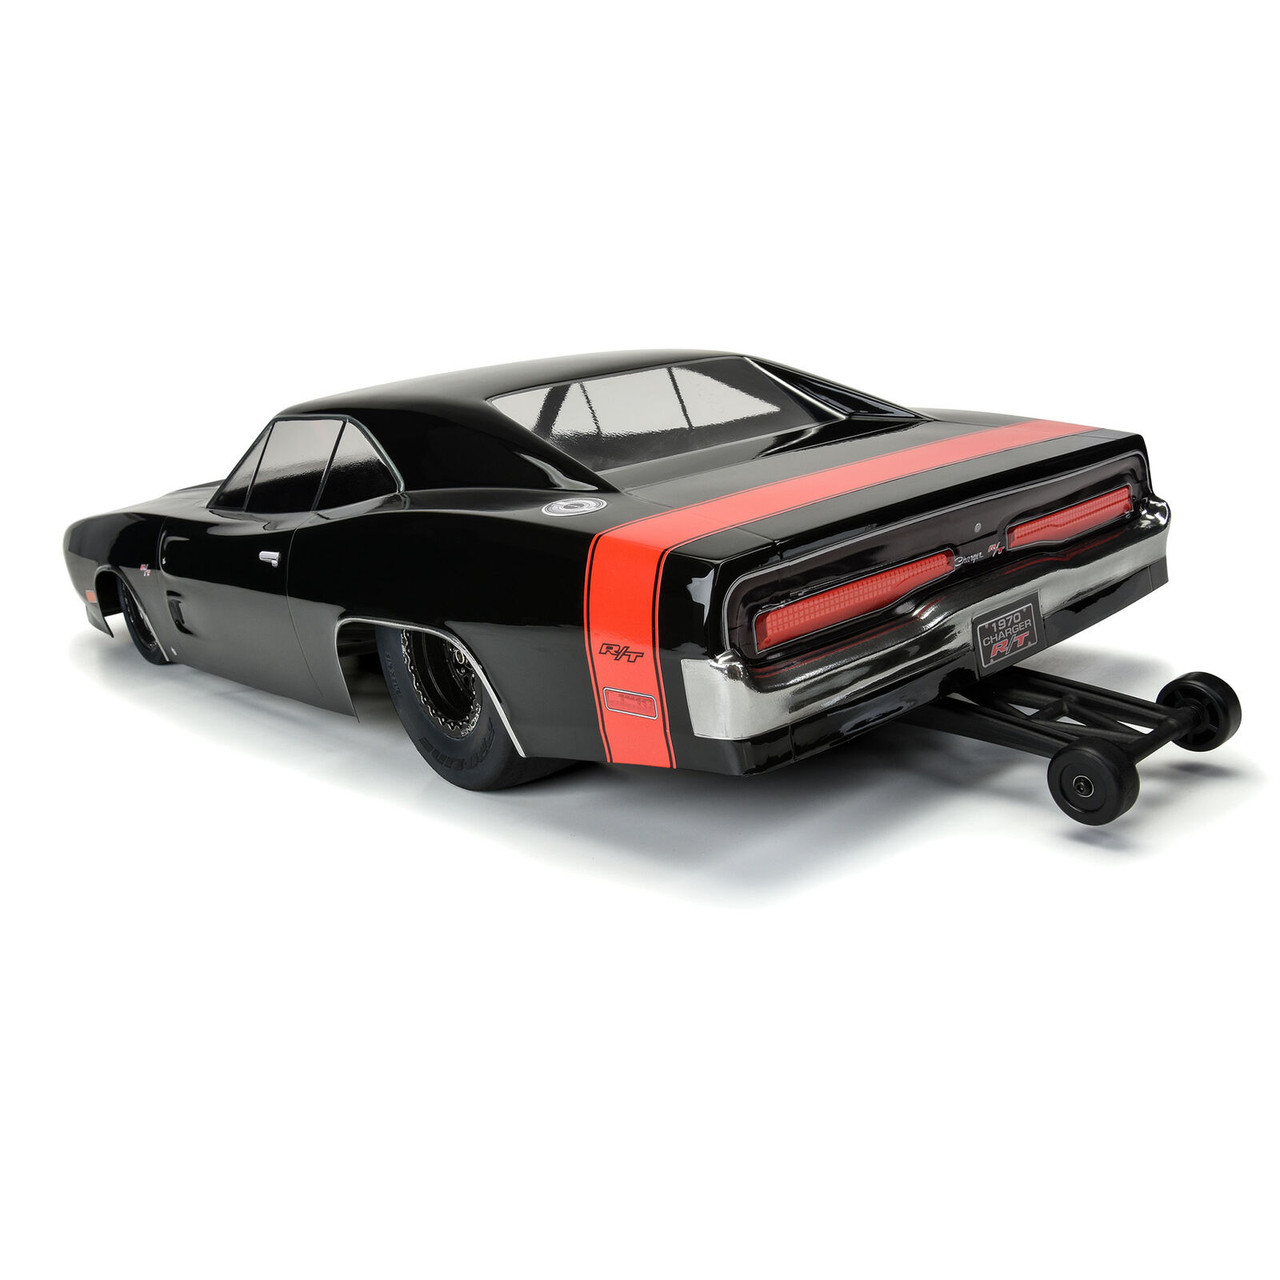 Proline 359900 1/10 1970 Dodge Charger Clear Body, Drag Car